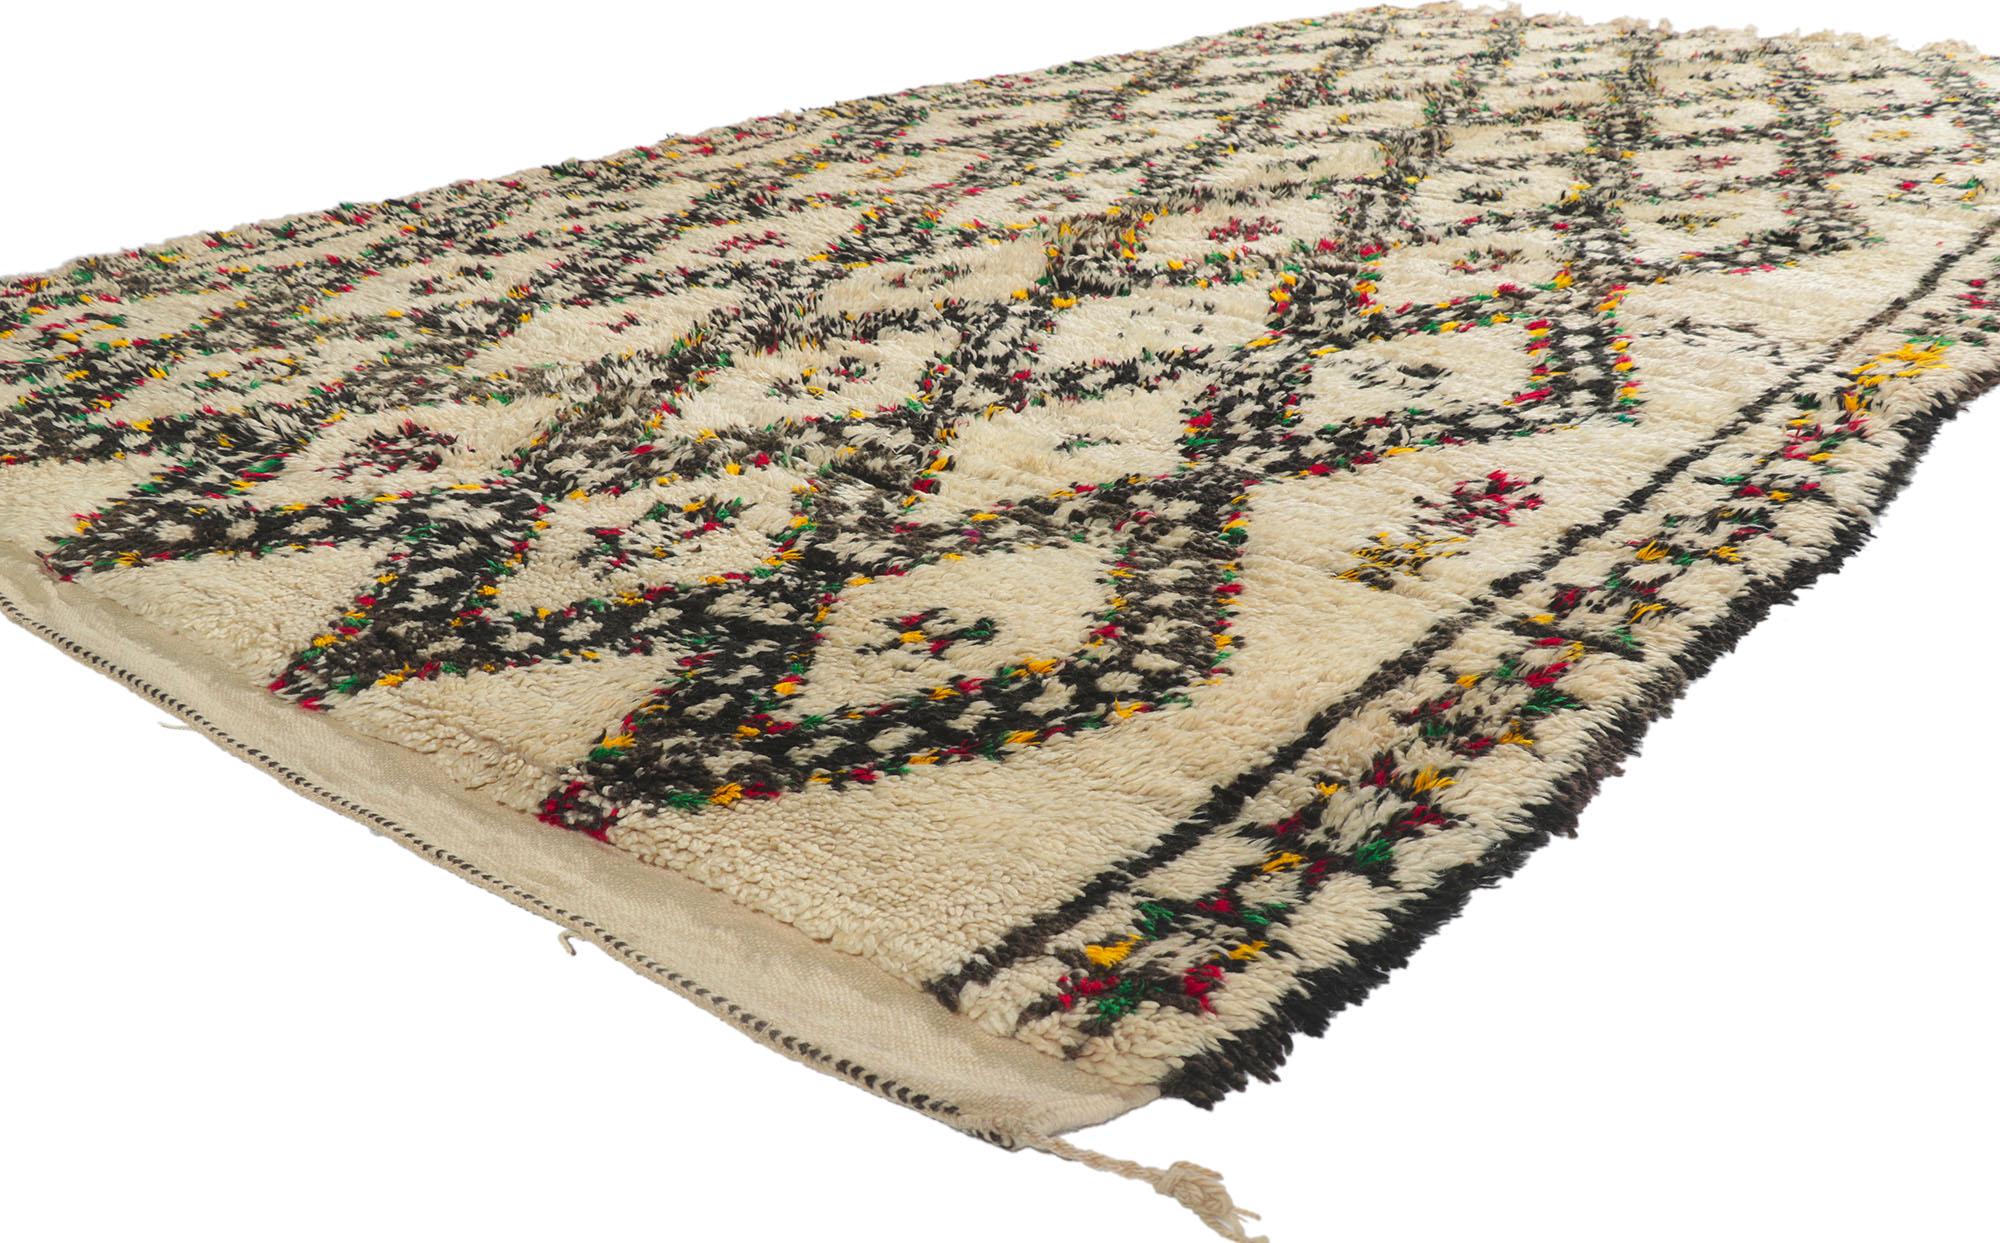 21375 Vintage Moroccan Beni Ourain Rug, 06'04 x 11'09​. Emerging from the Beni Ourain tribe, a prominent segment of Morocco's expansive Berber community, these Moroccan rugs are meticulously fashioned from untreated sheep's wool, accentuating their